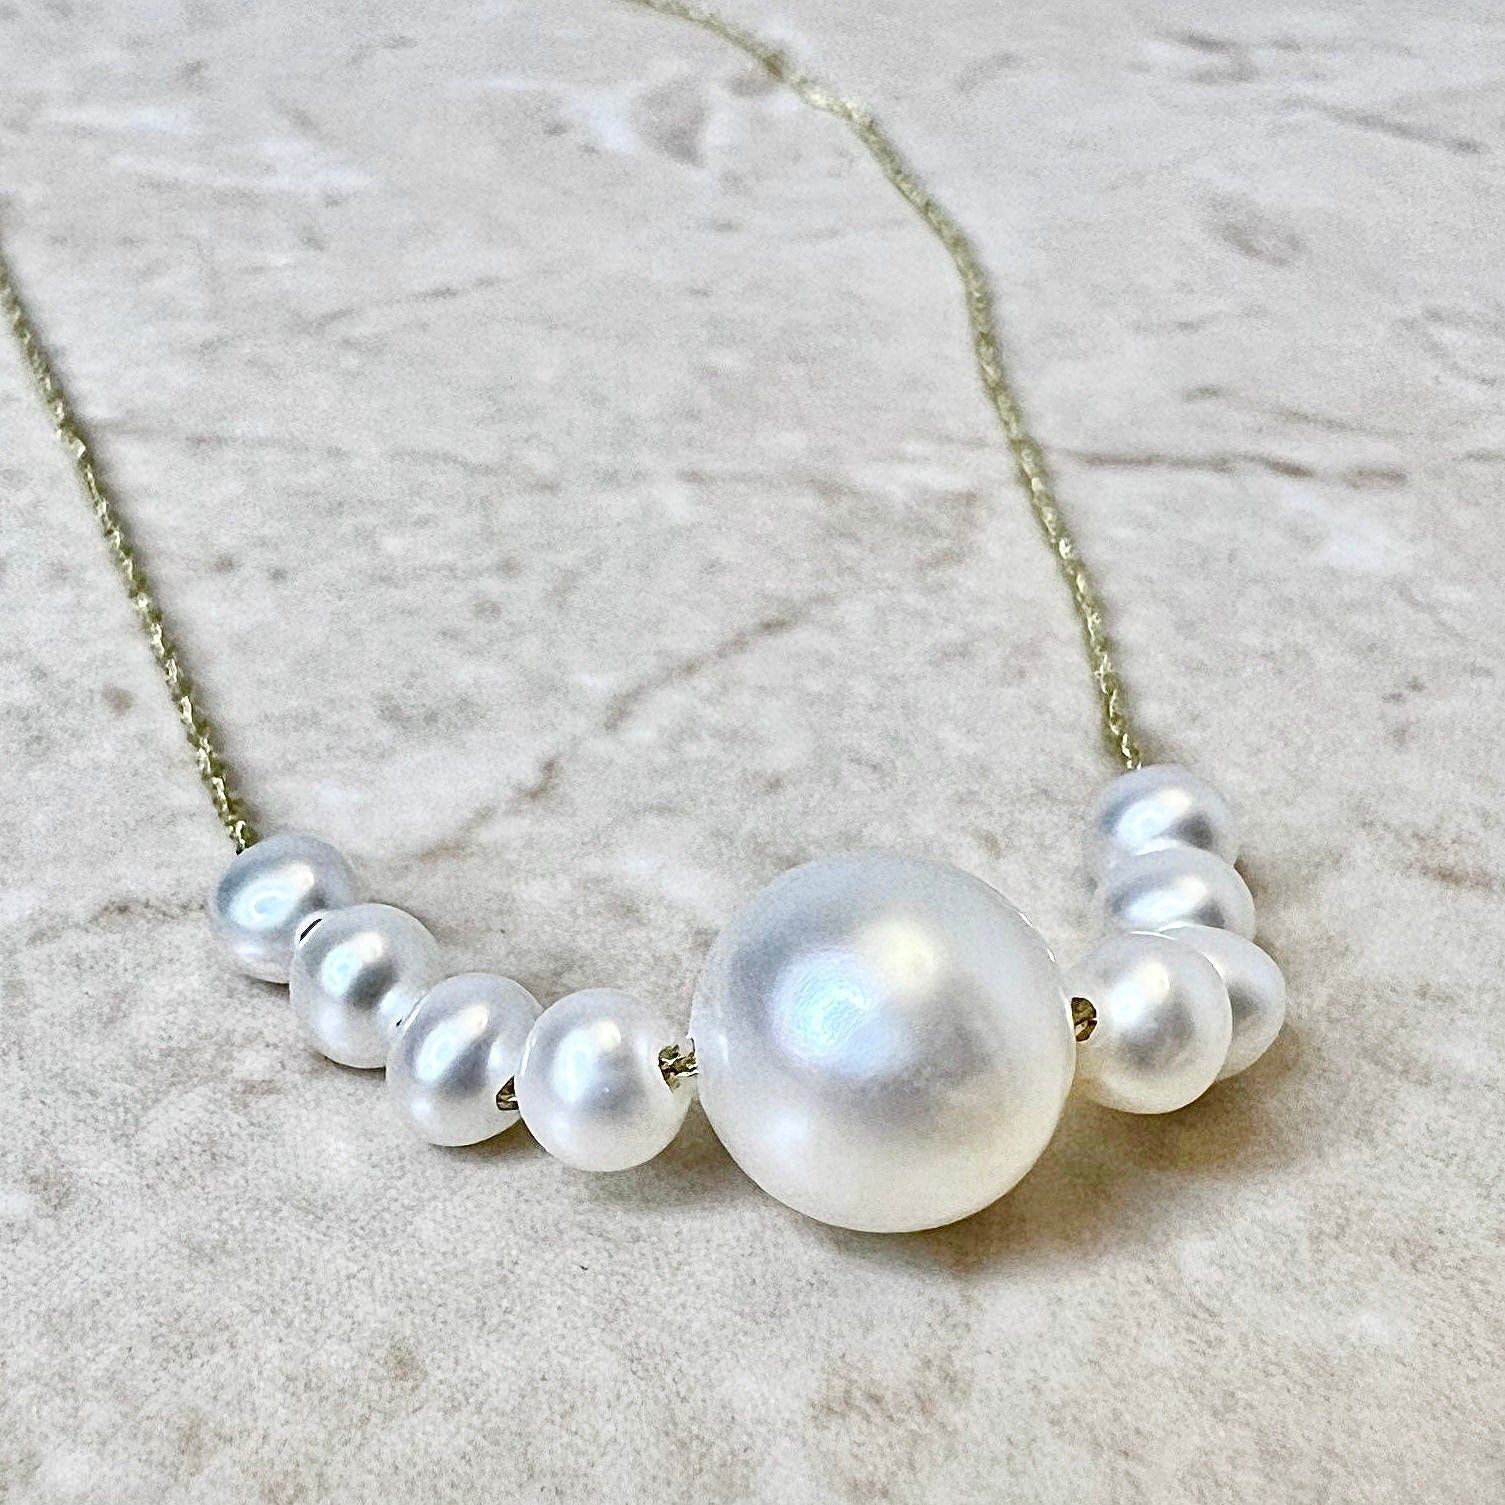 14K White Pearl Pendant Necklace - Yellow Gold Genuine Pearl Necklace - Freshwater Pearl - Birthday Gift - June Birthstone - Holiday Gift